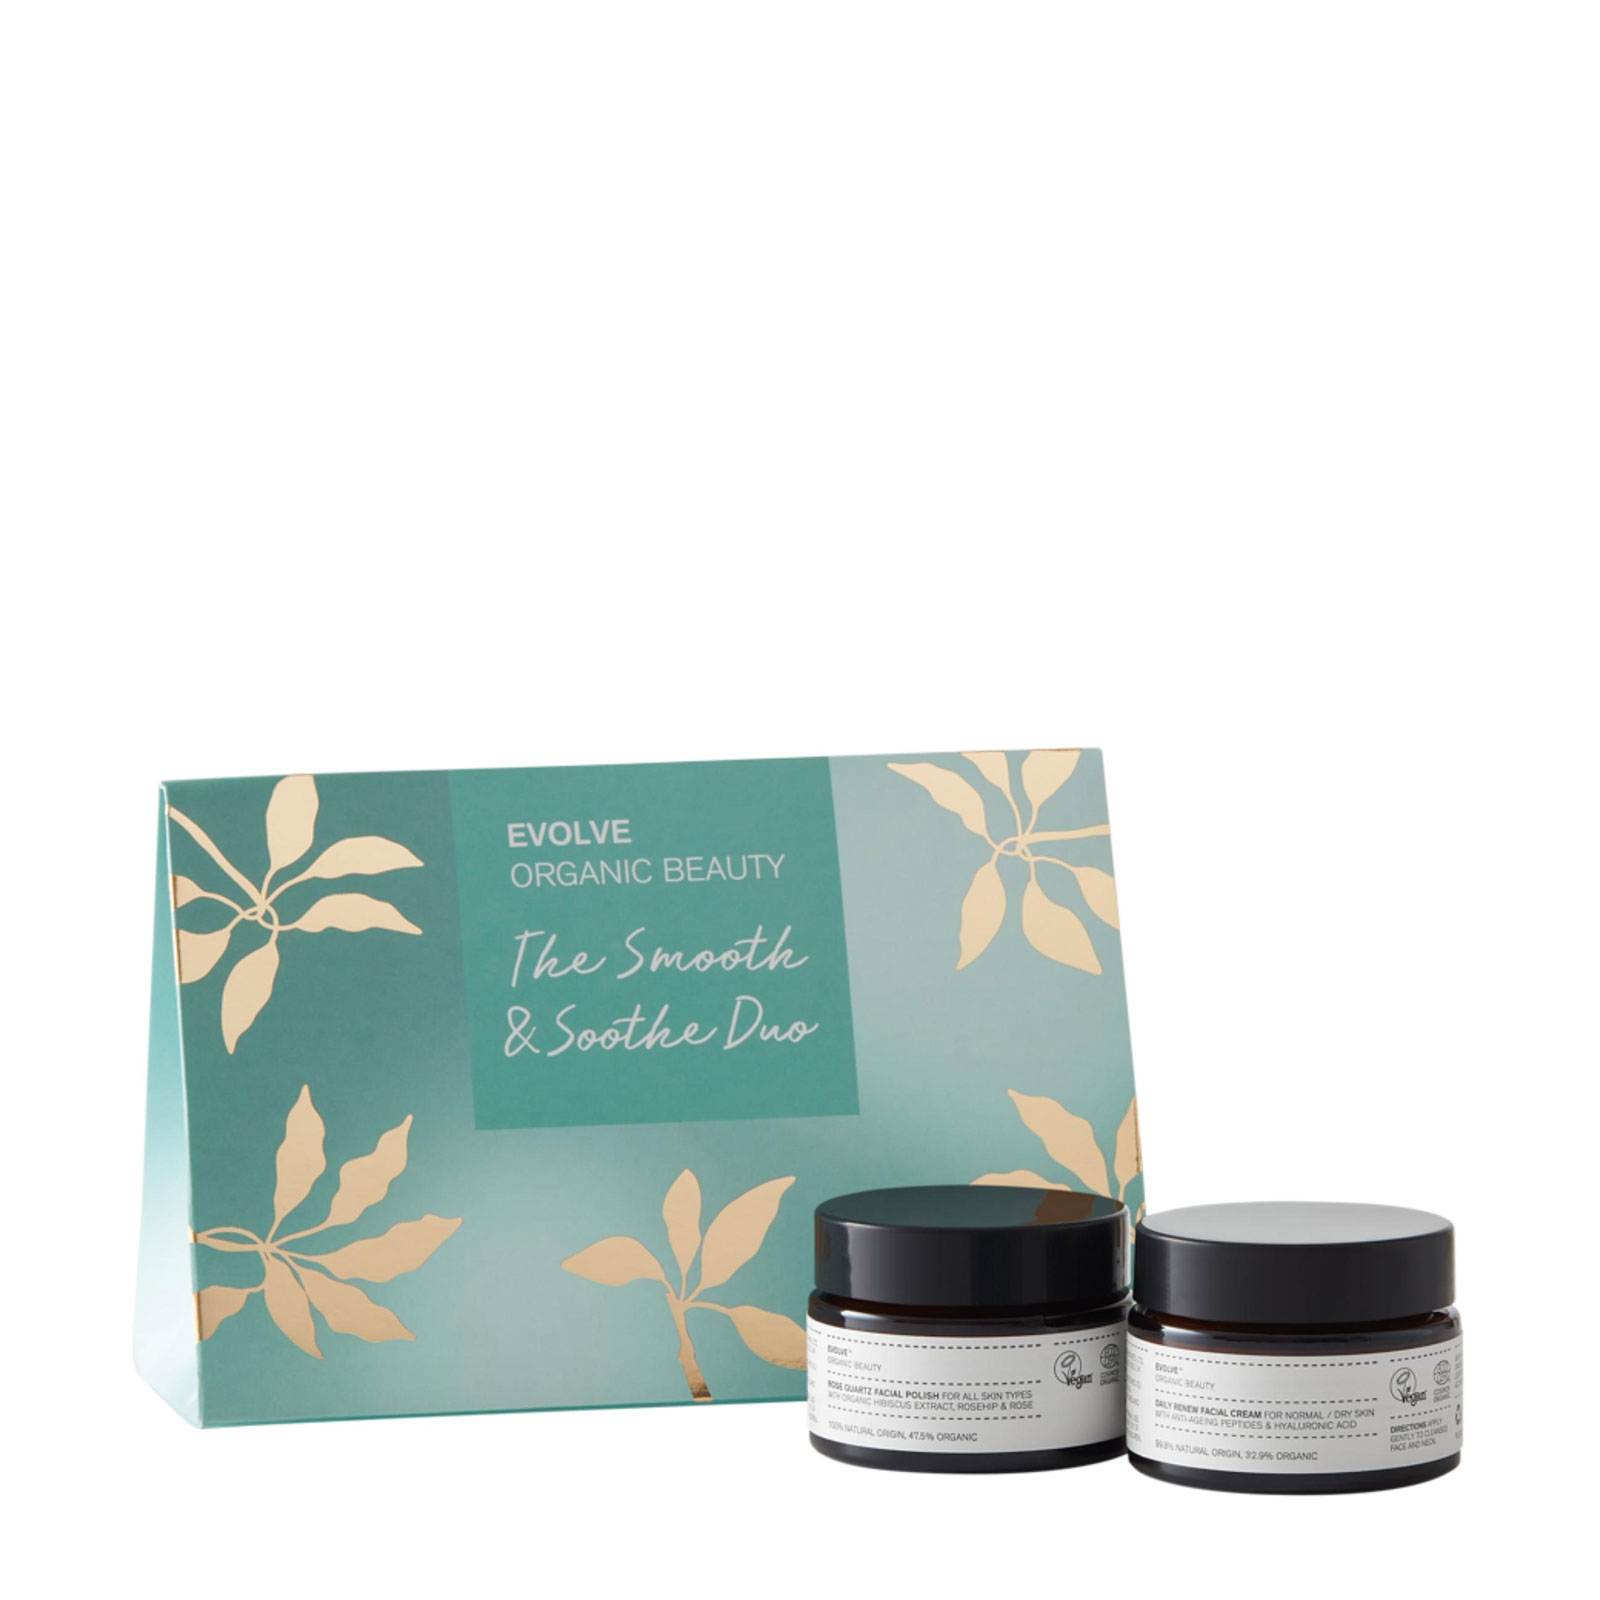 Evolve Organic Beauty the Smooth & Soothe Duo